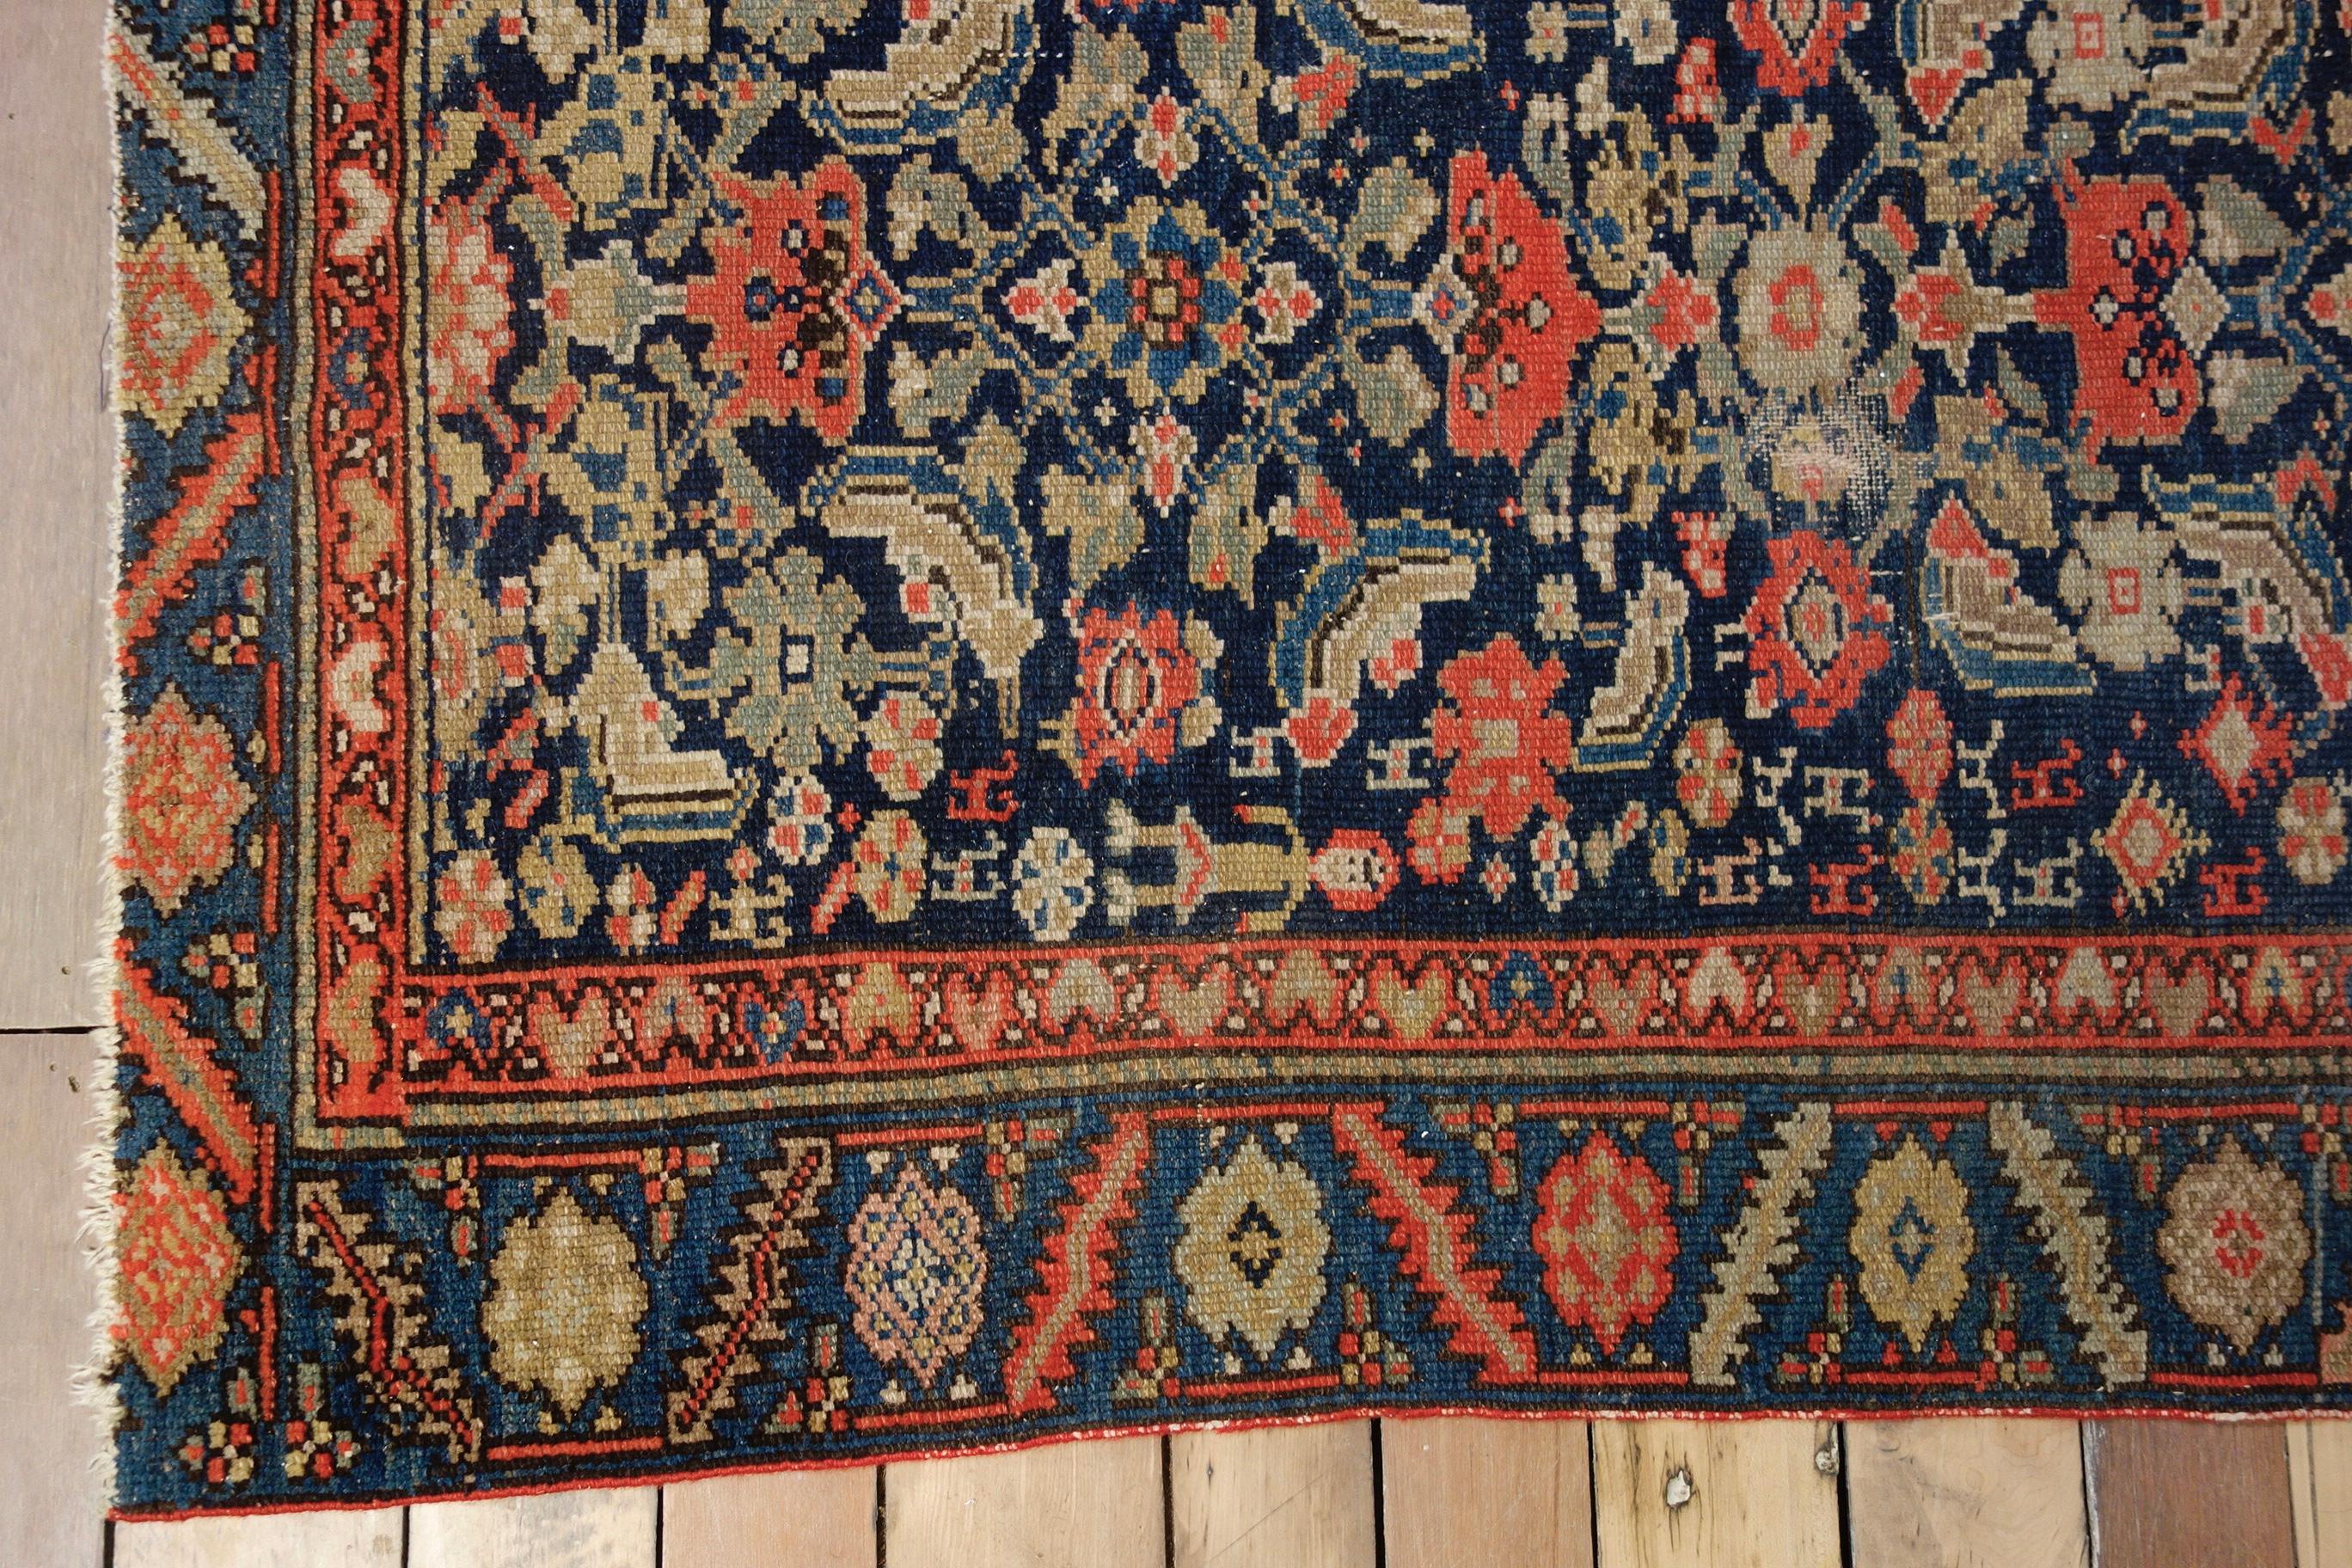 Cotton Late 19th Century Long Near Pair of Malayer Persian Runners, Rugs Colourful